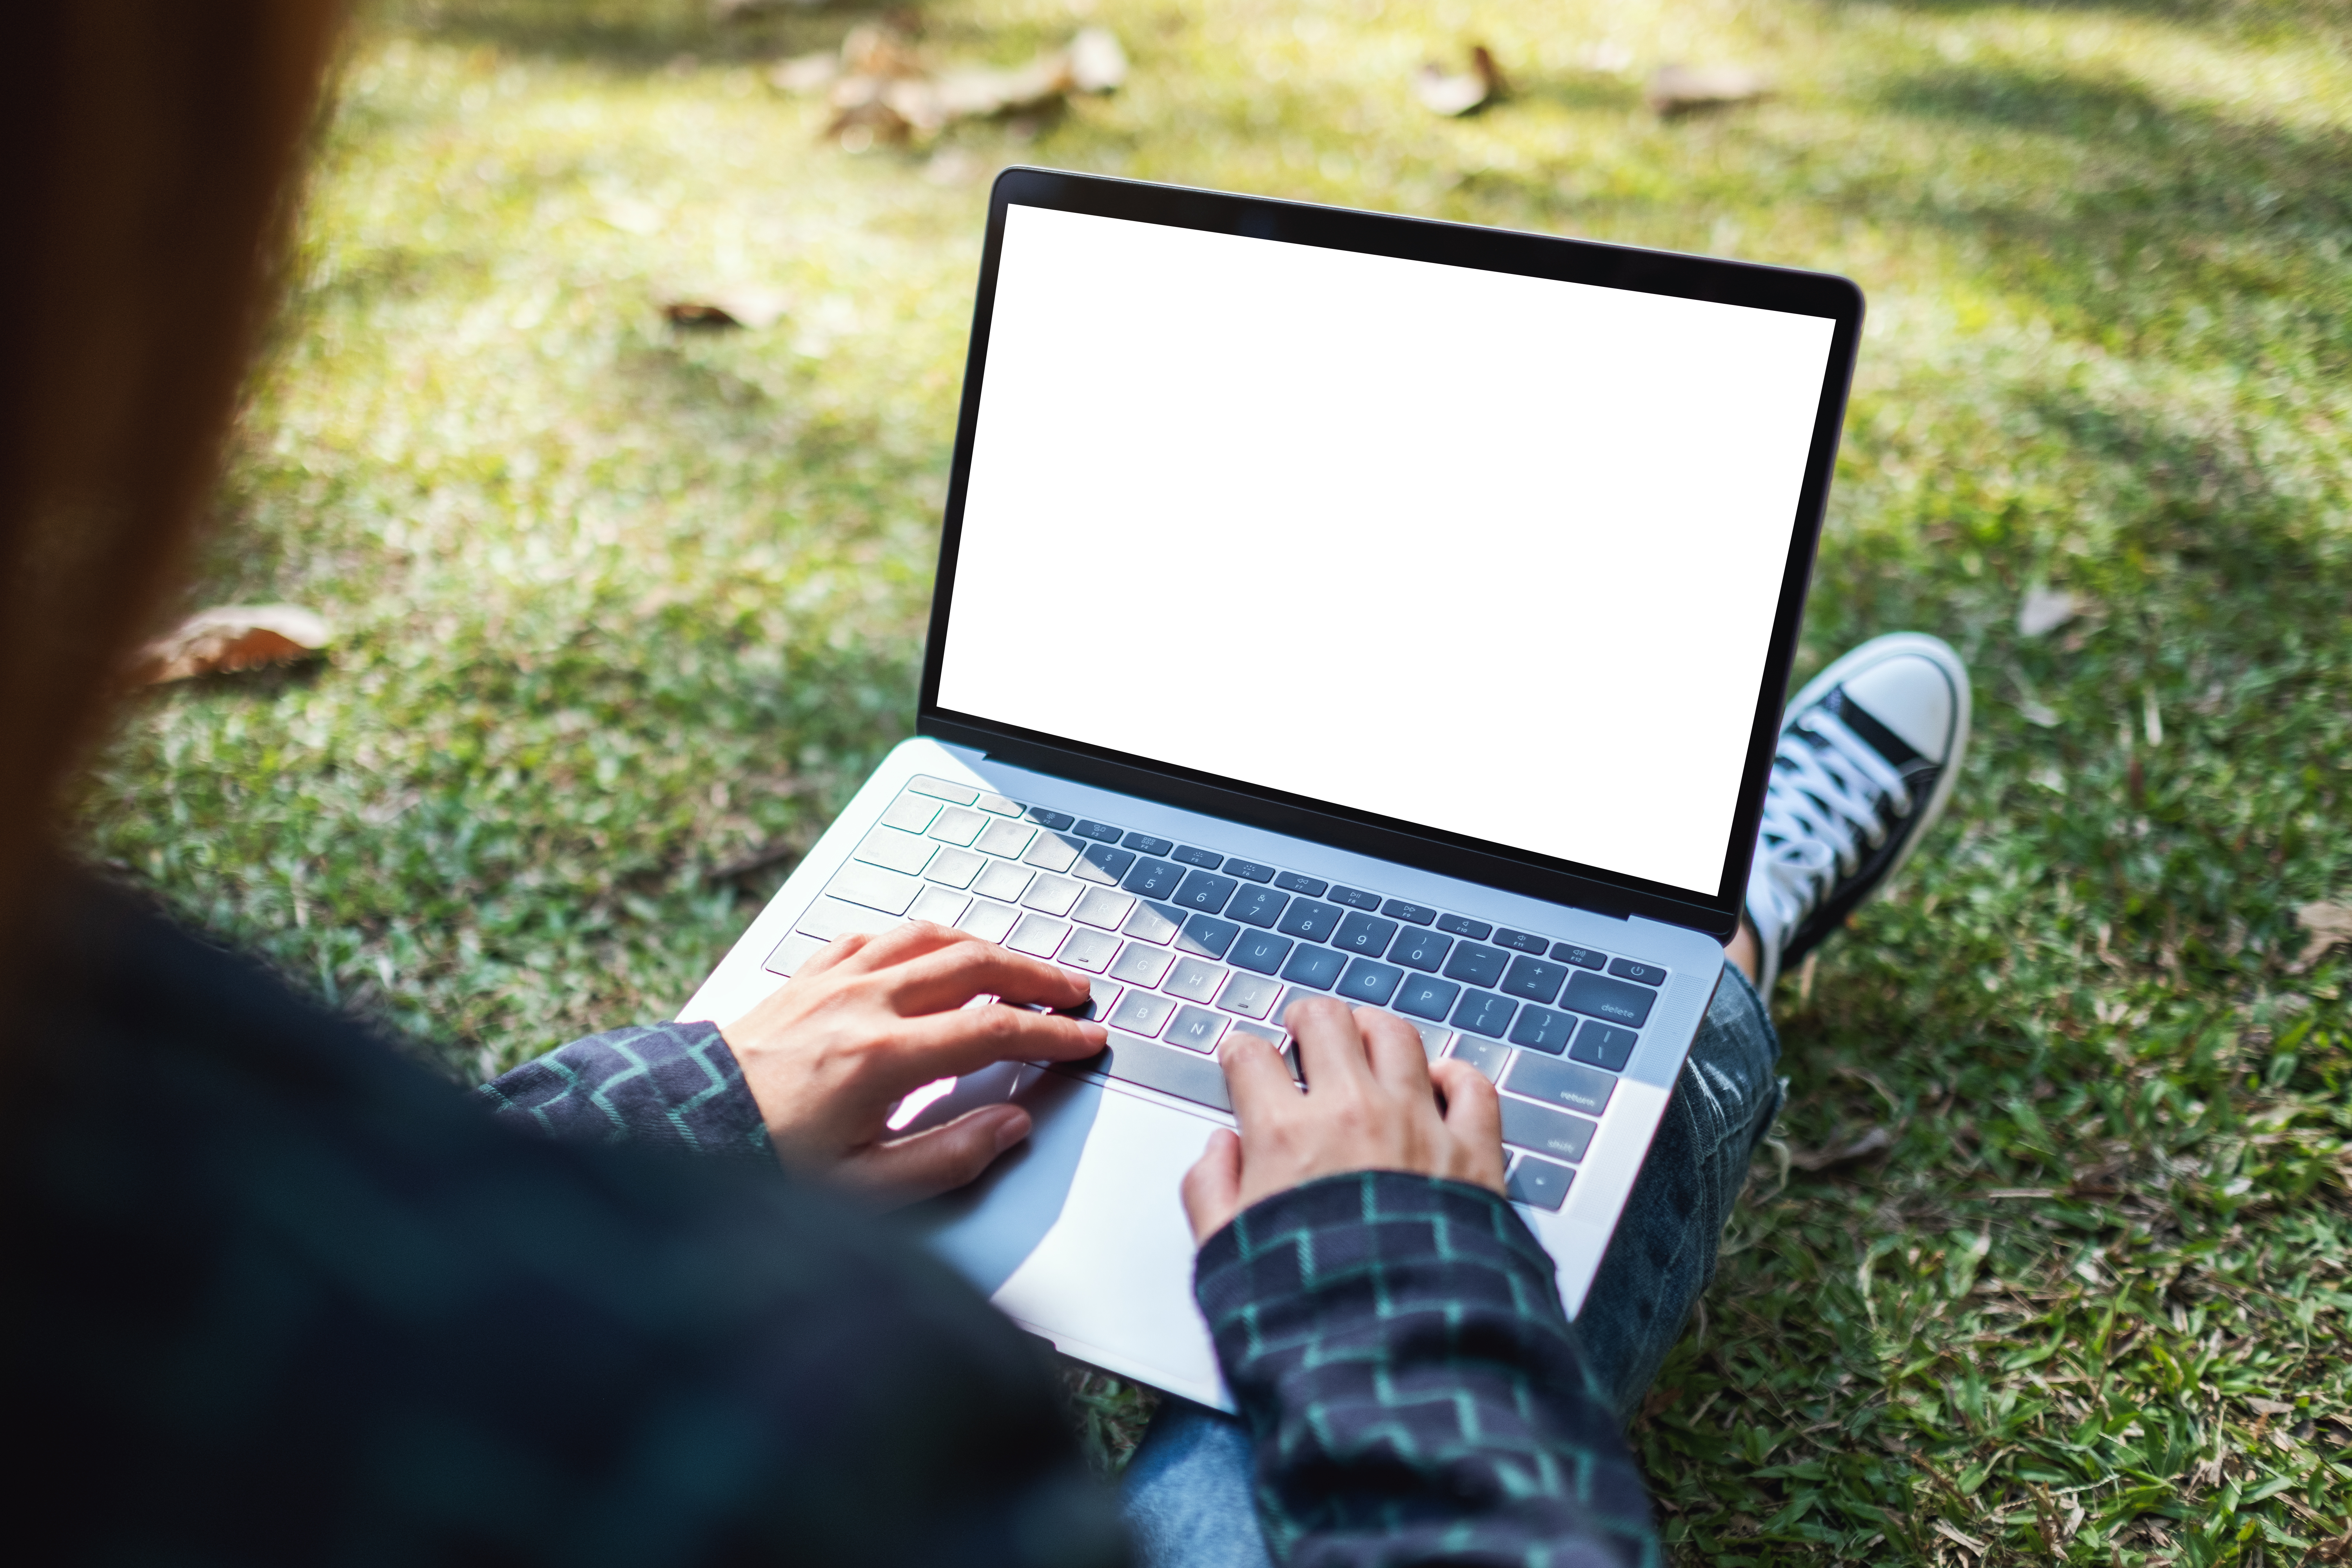 Image taken from behind a woman's shoulder as she sits on the grass, writing on her laptop